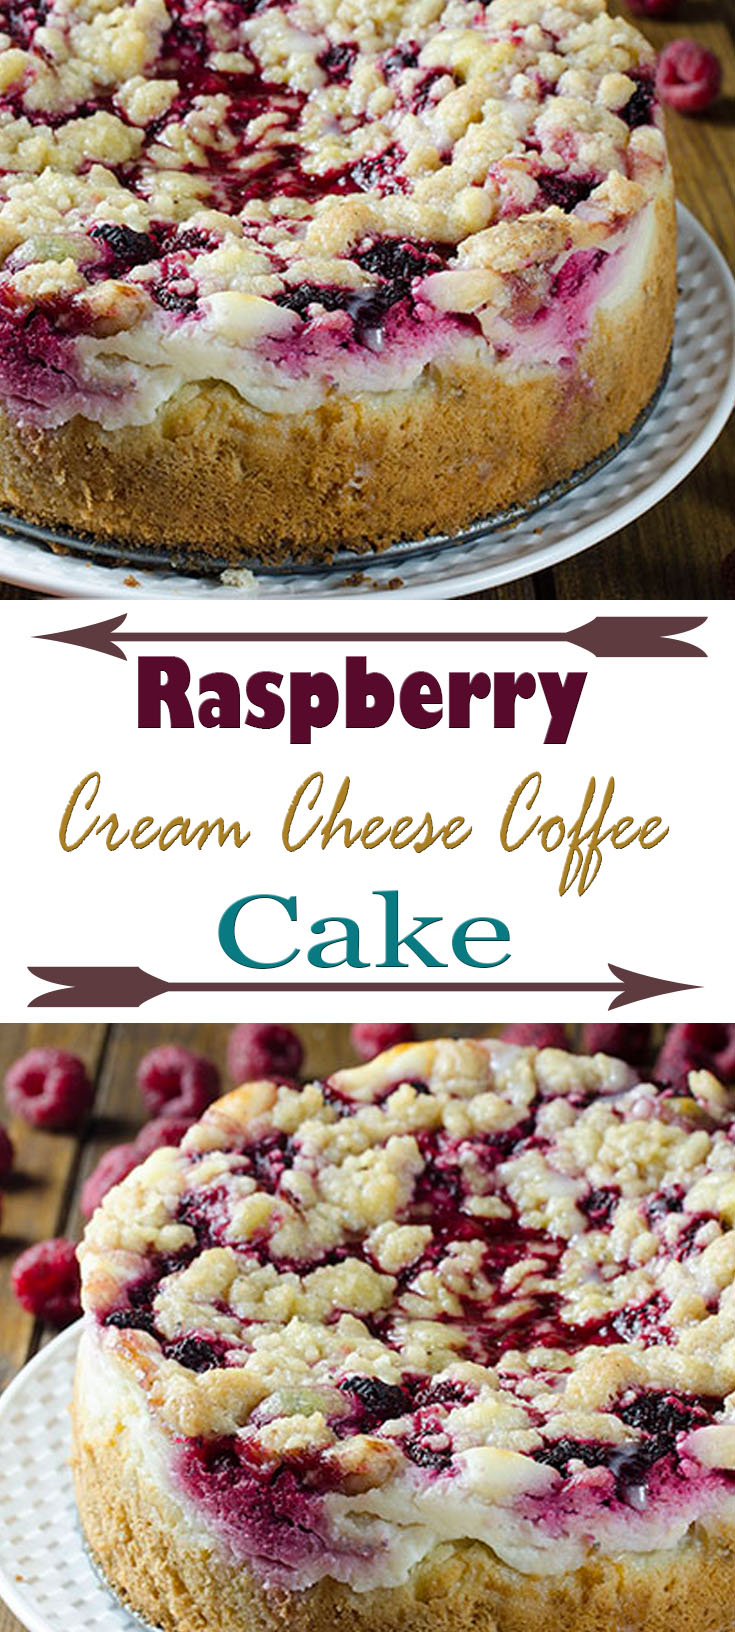 Raspberry Layer Cake with Cream Cheese Frosting ~Sweet & Savory